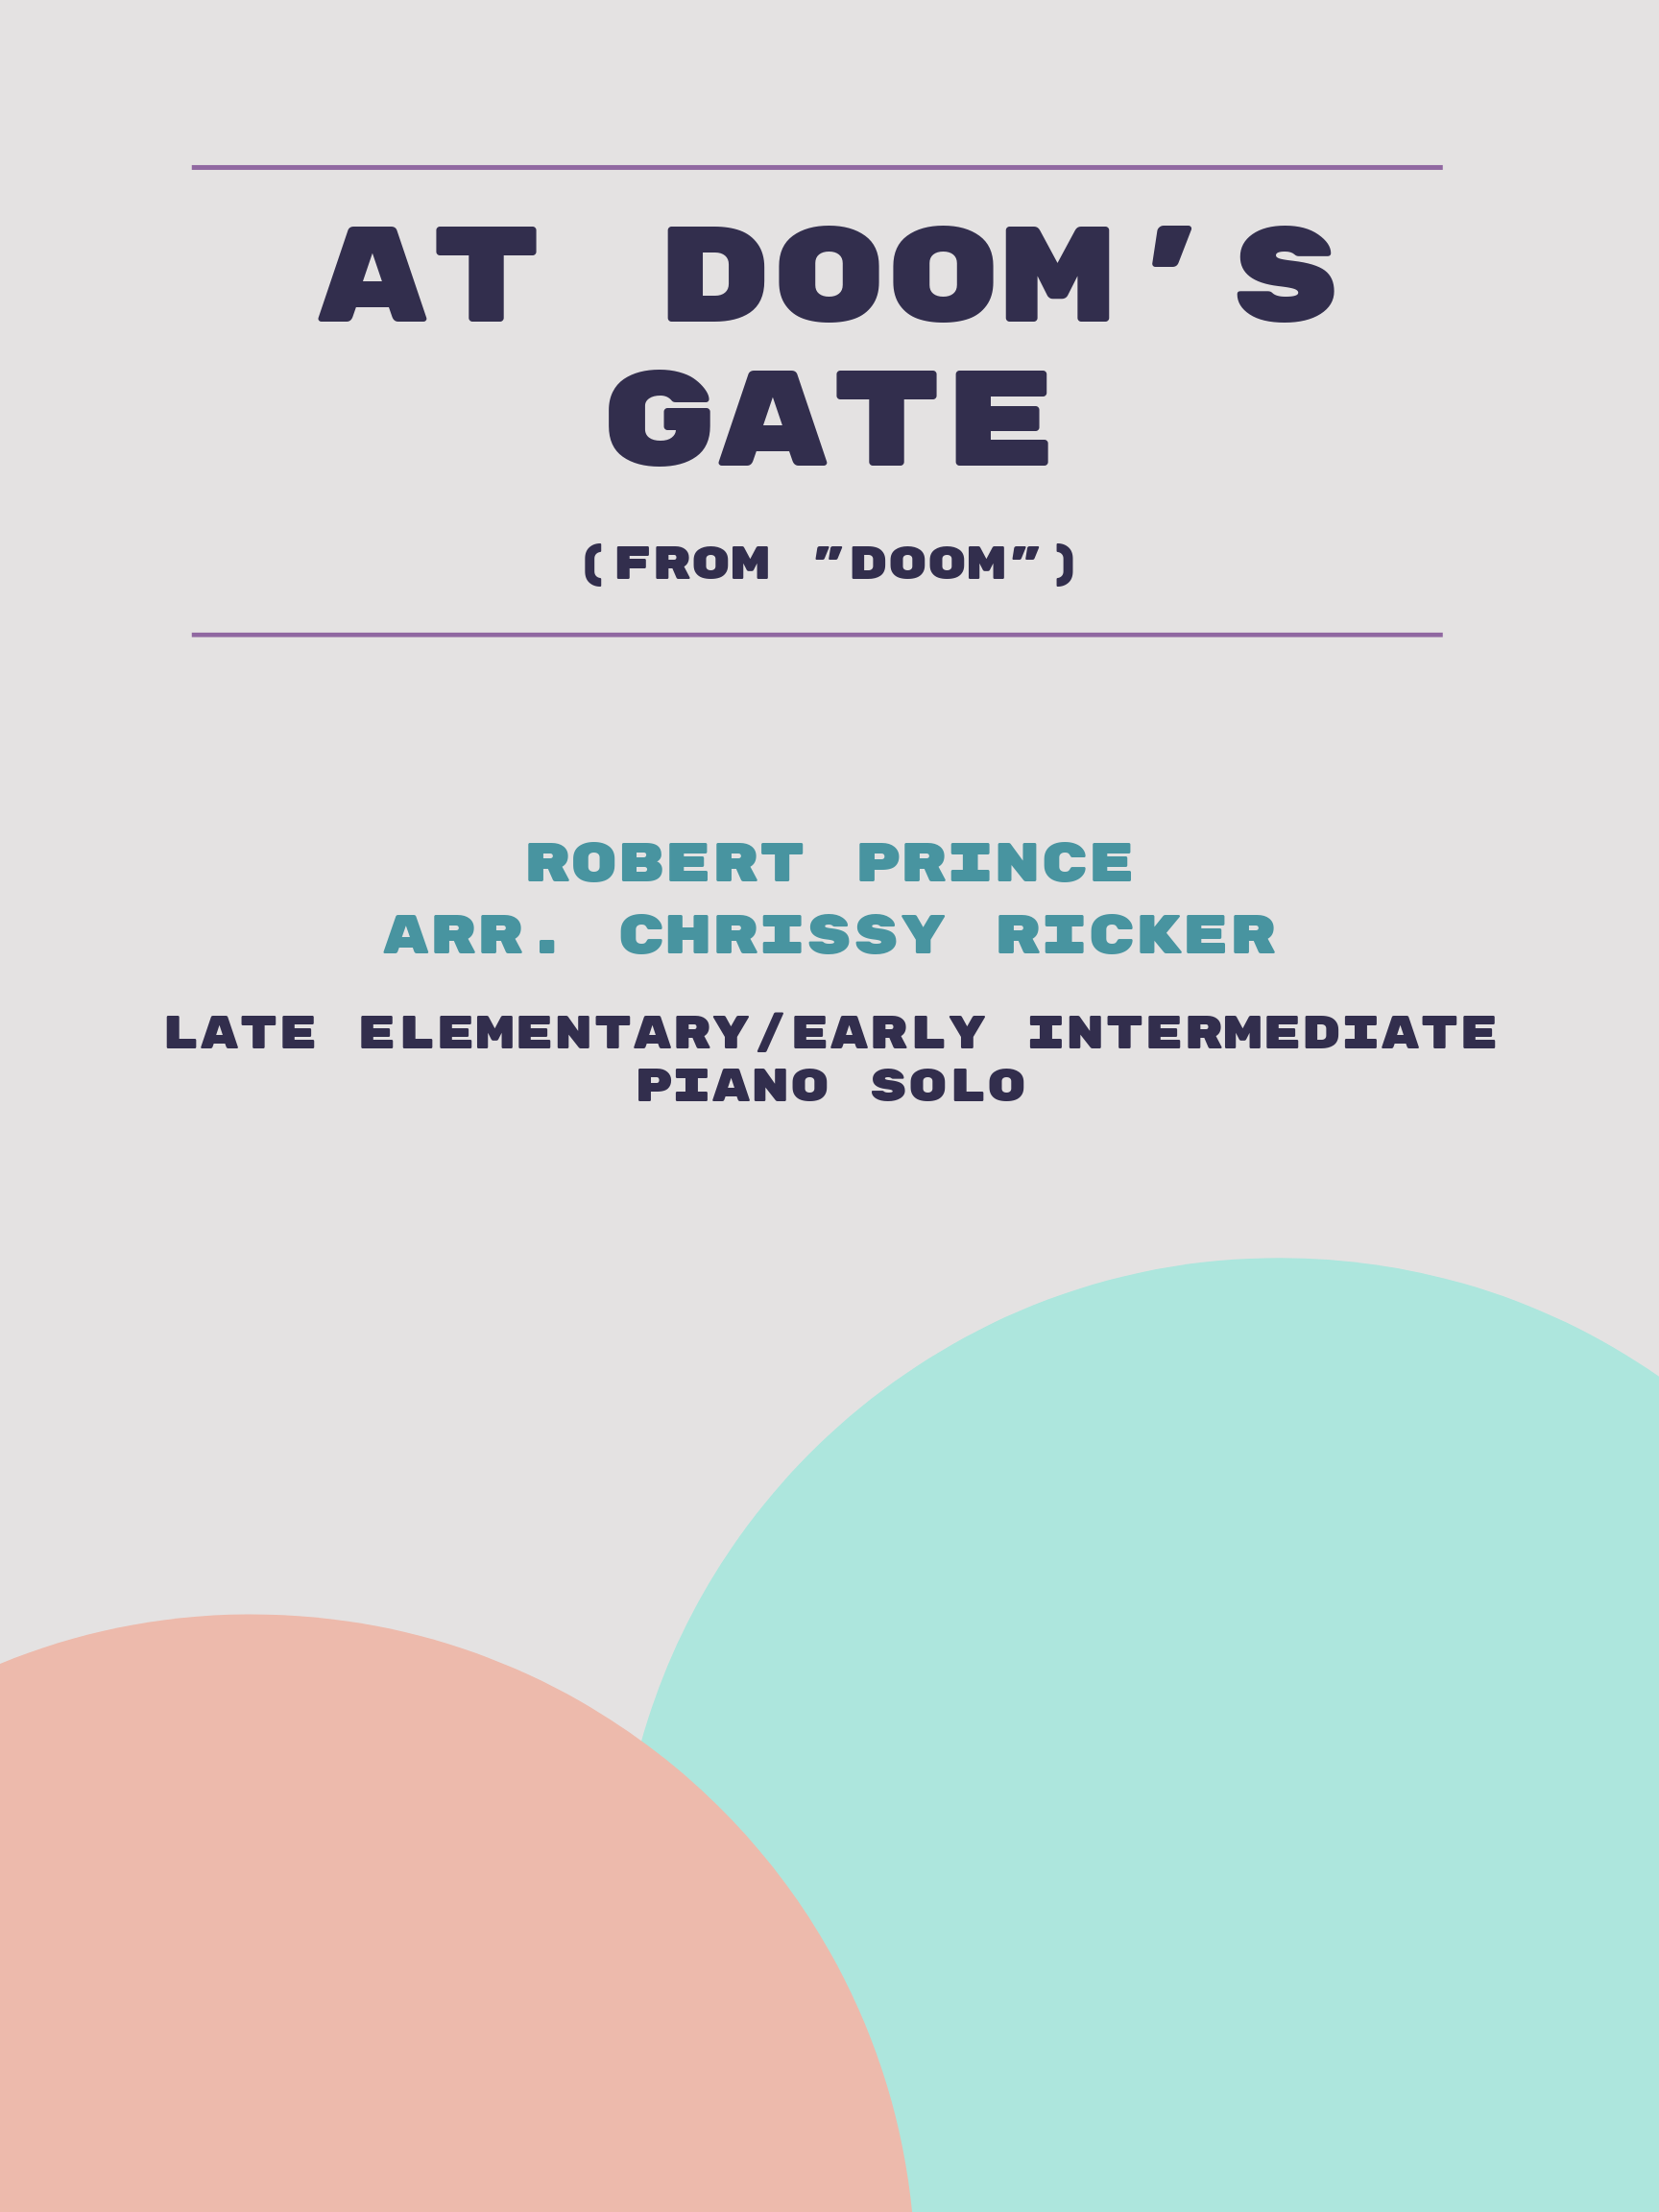 At Doom's Gate by Robert Prince